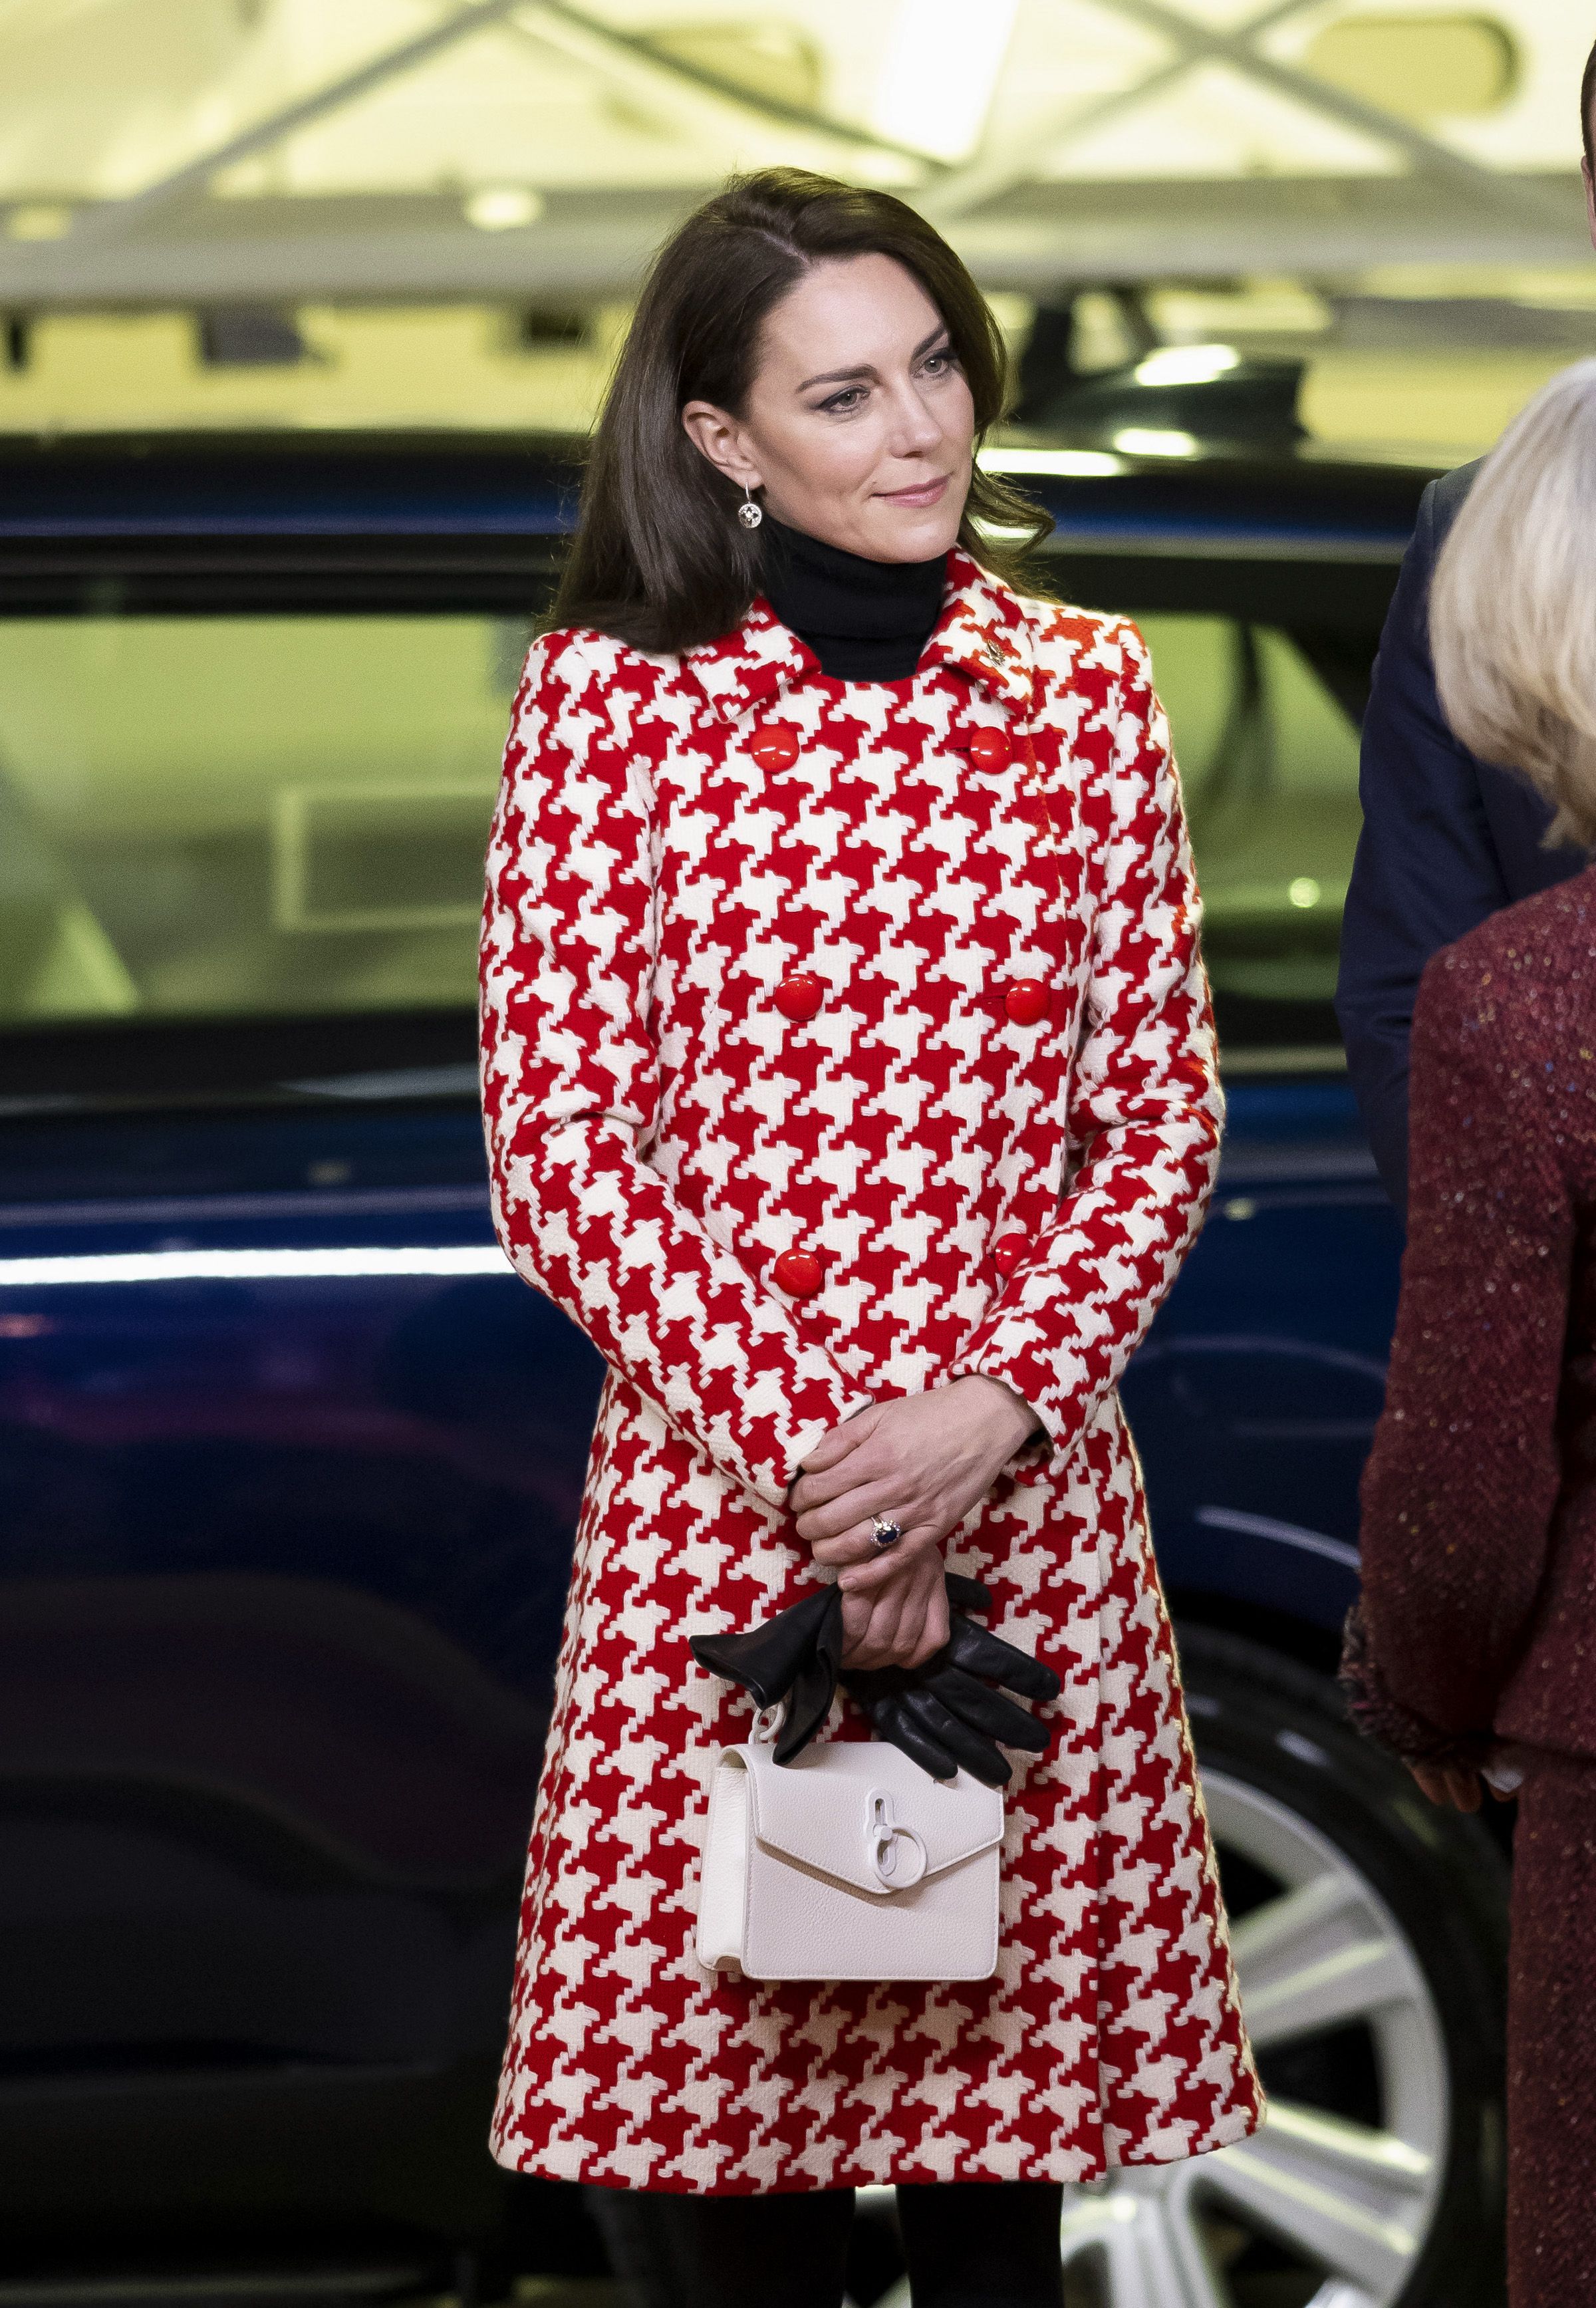 See Princess Kate Rewear Her Red Houndstooth Coat Dress to a Rugby